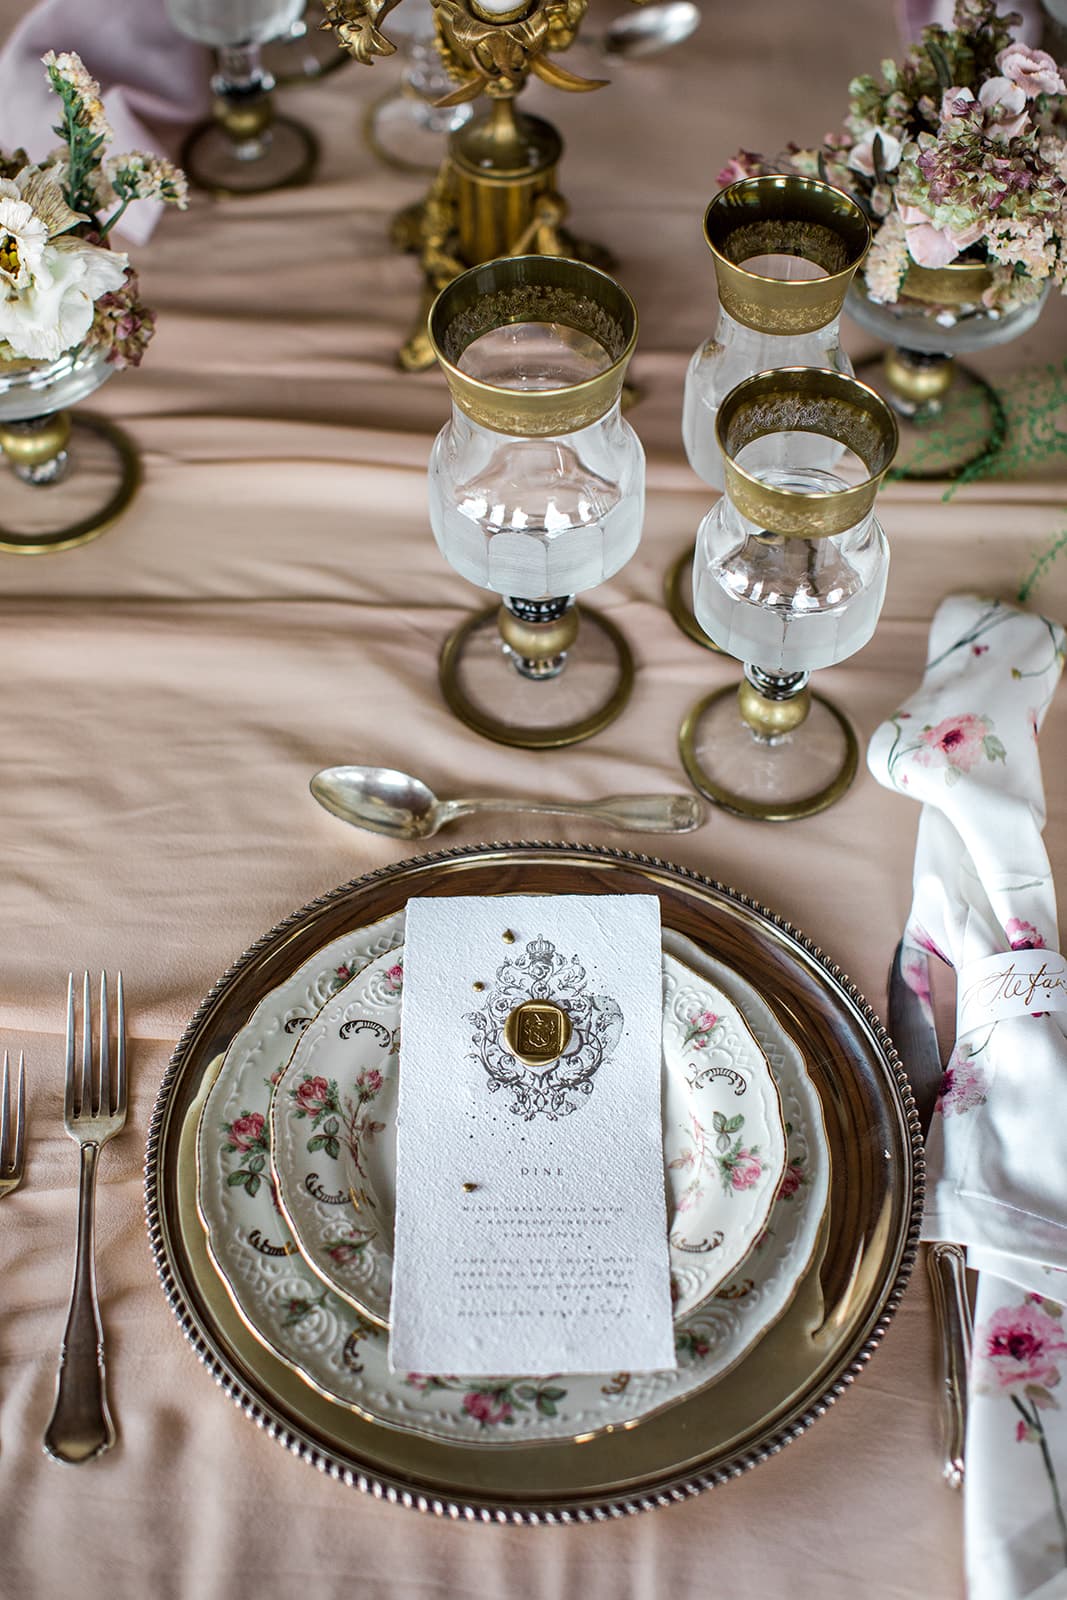 Vow renewal reception table setting